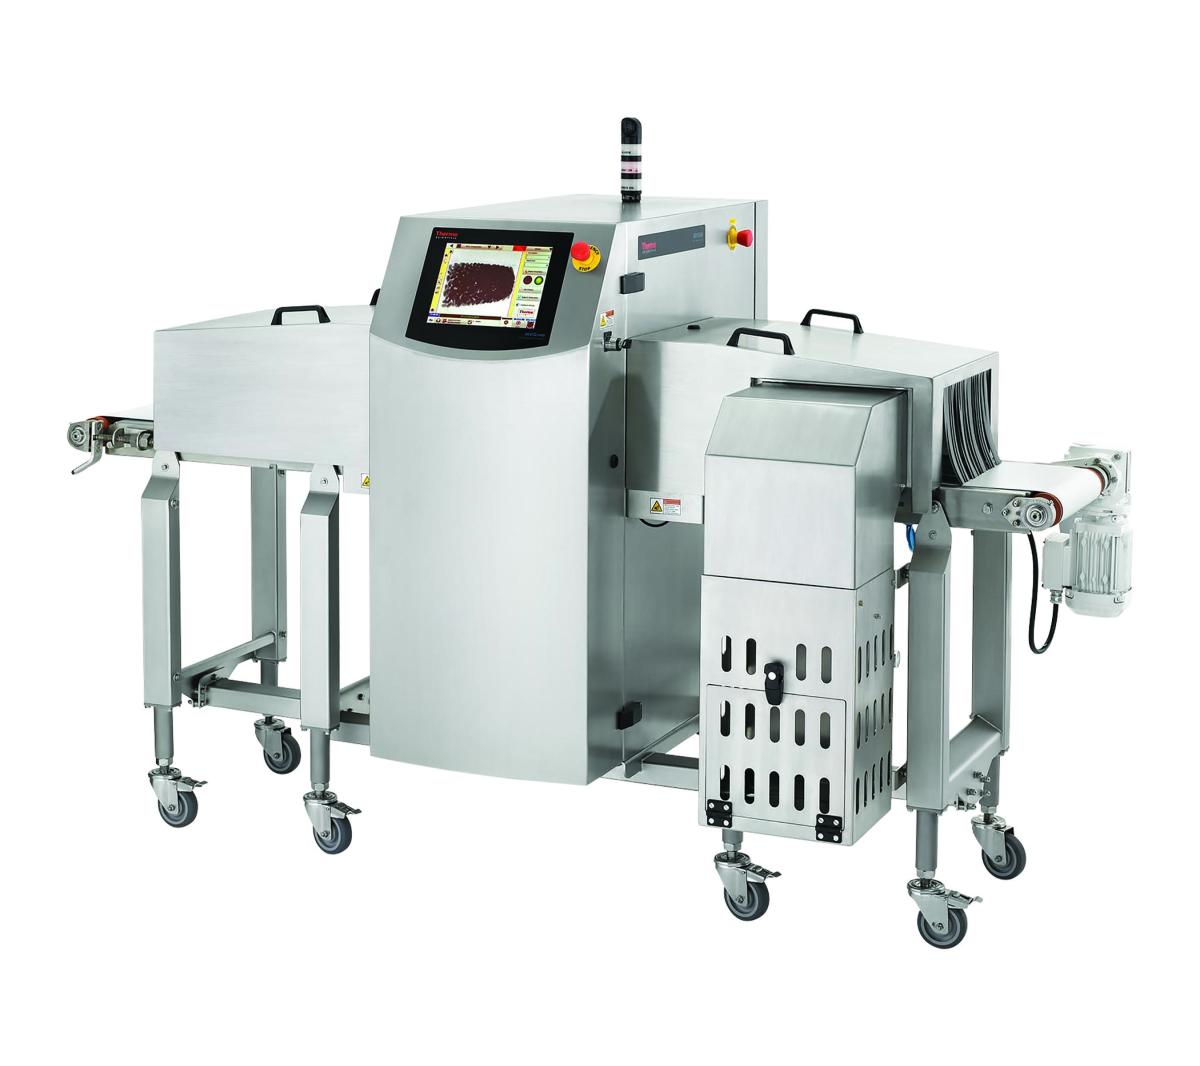 Thermo Fisher product inspection systems